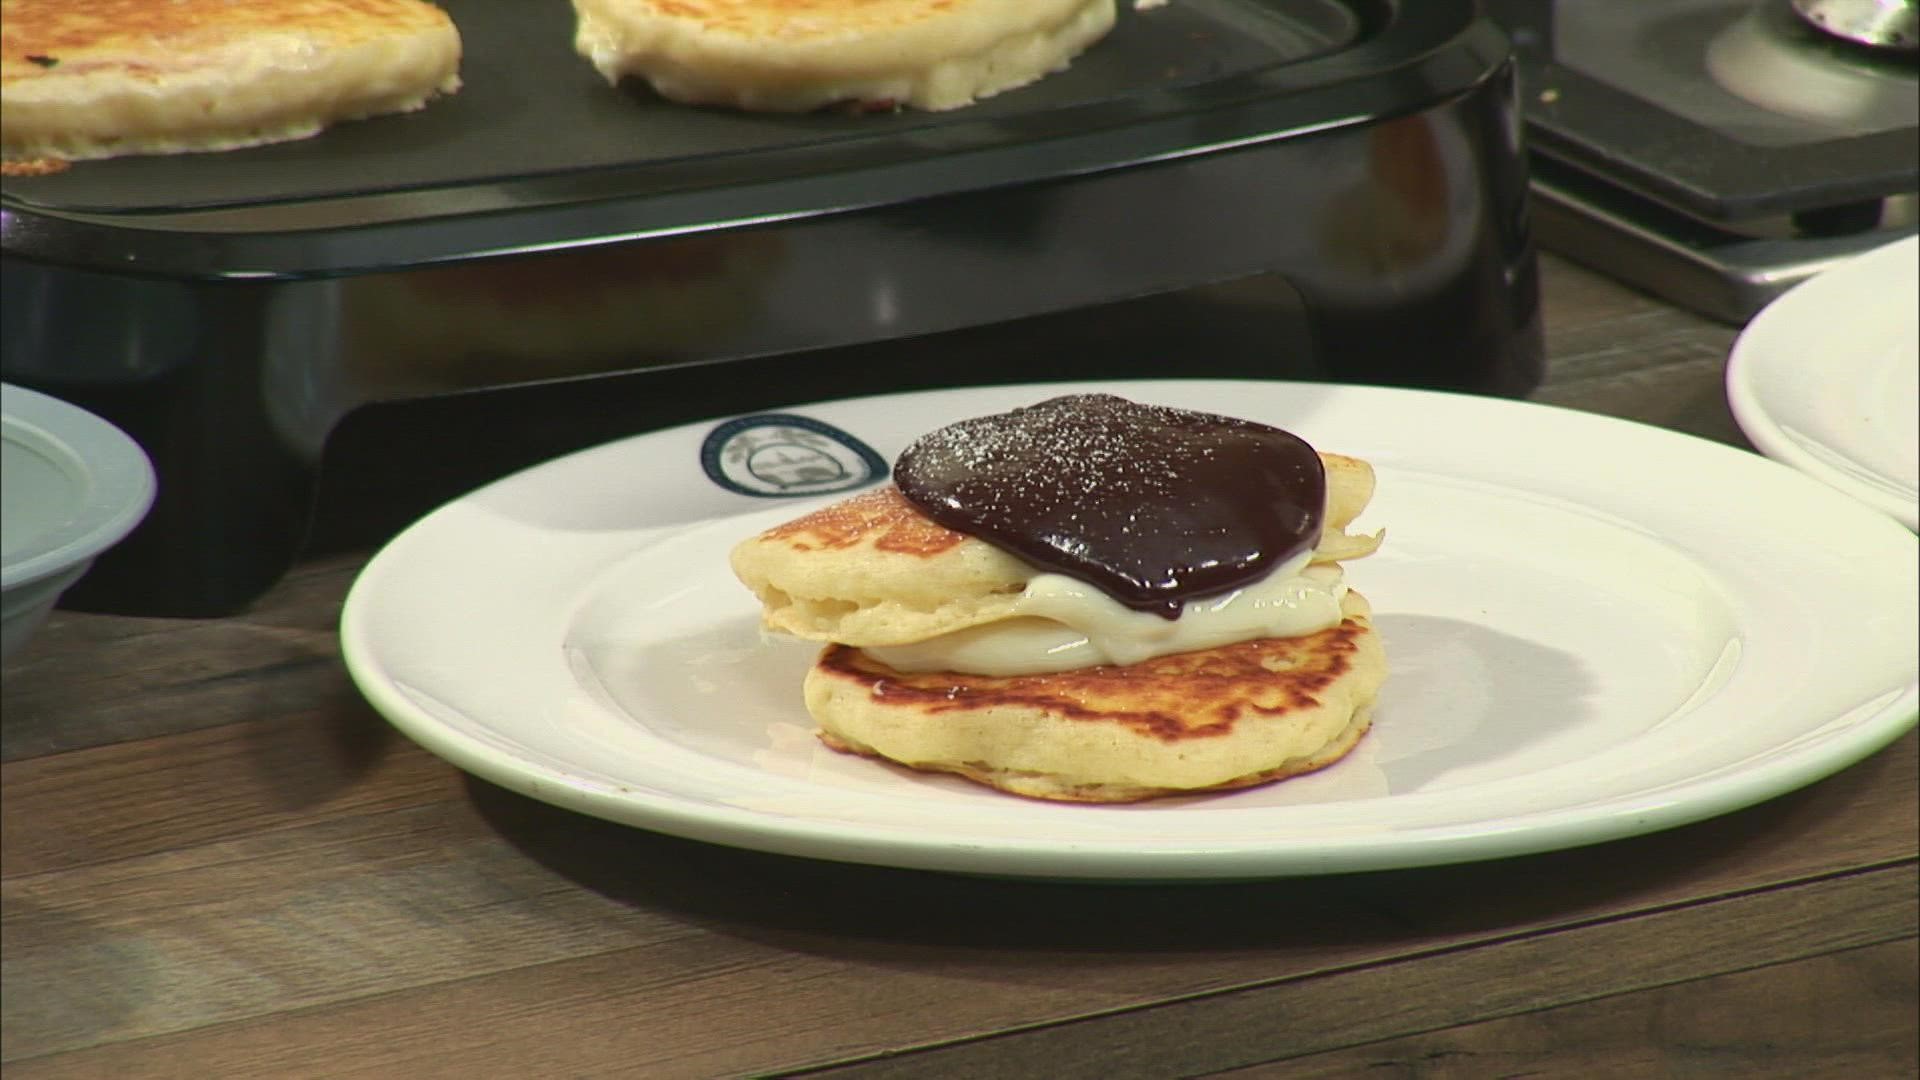 Chef Bo Byrne shows us how to add some flavor to your morning routine.